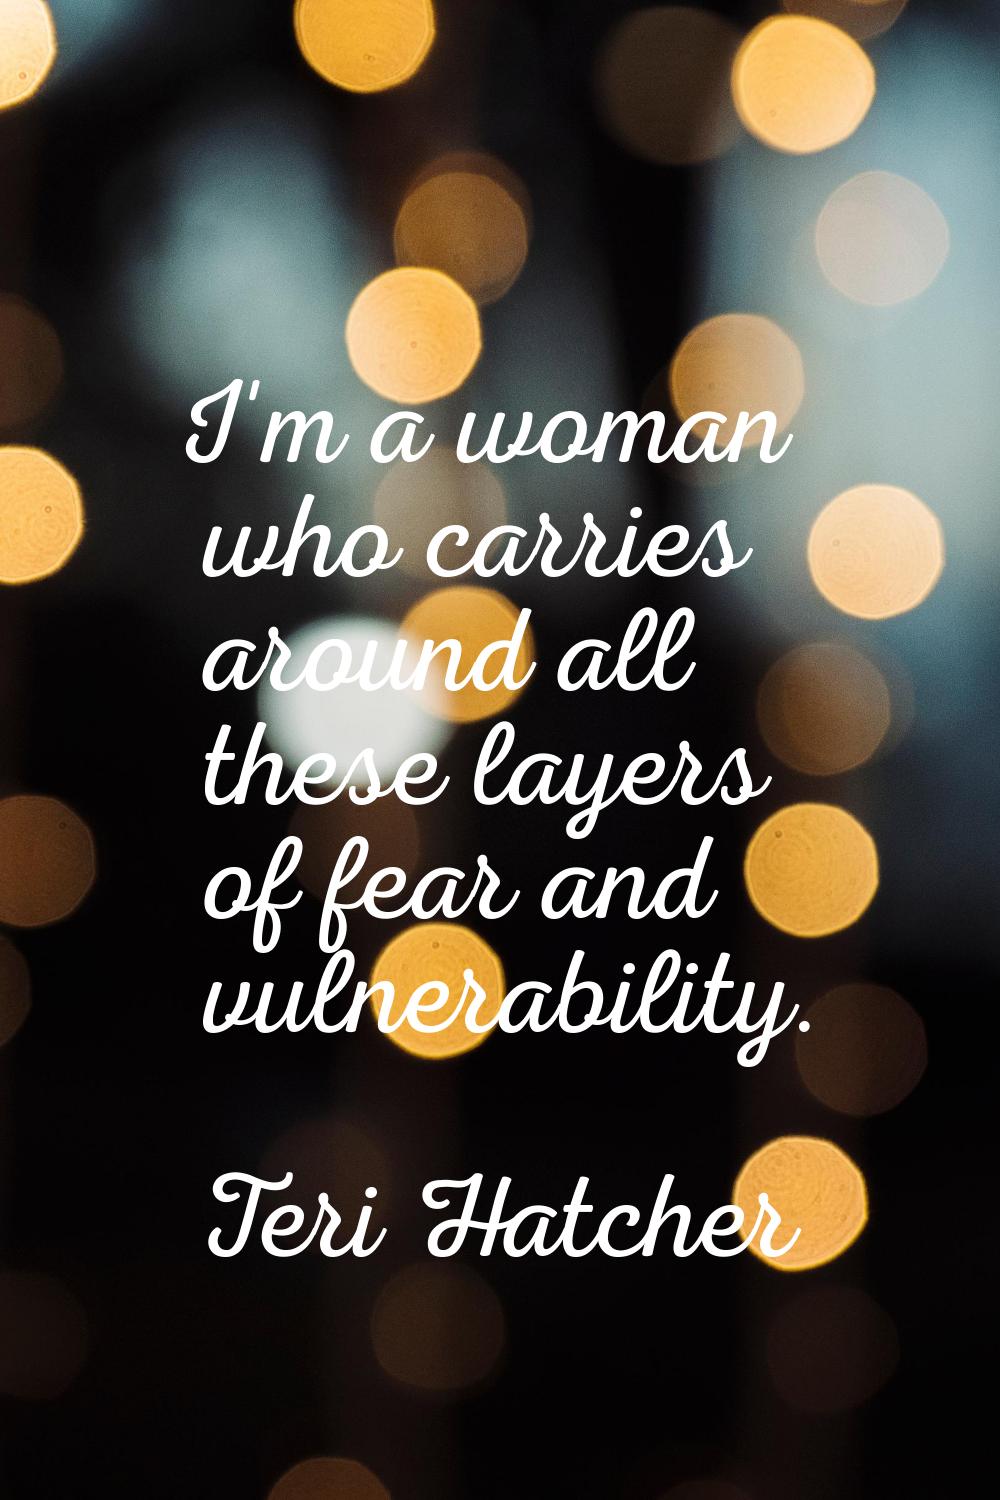 I'm a woman who carries around all these layers of fear and vulnerability.